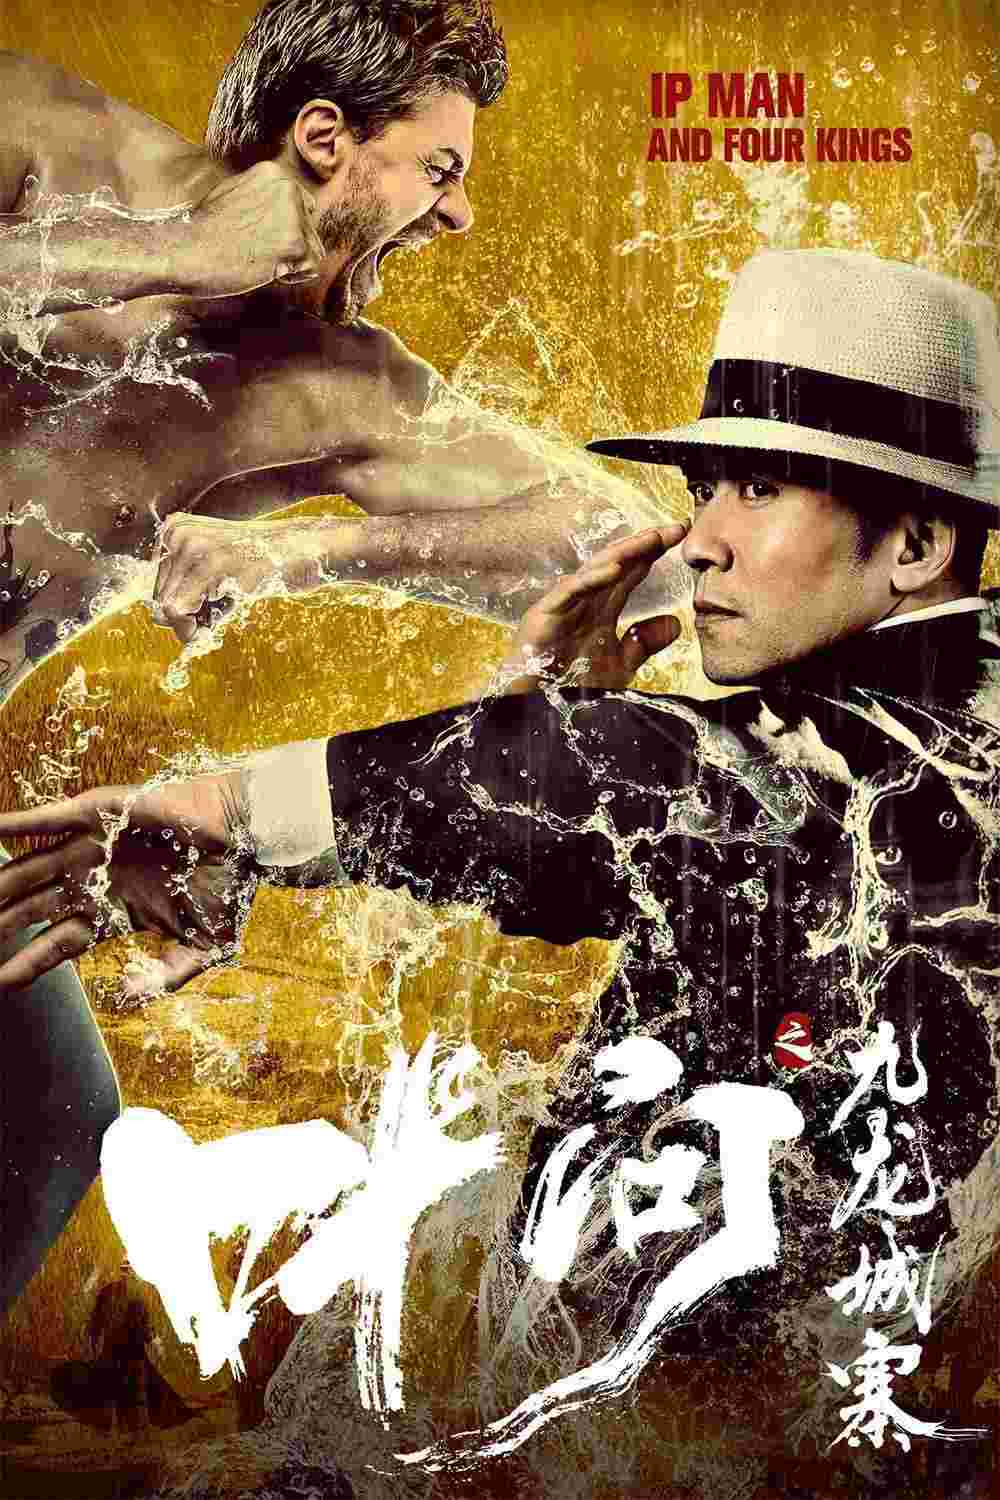 Ip Man and Four Kings (2019) Fengye Lin